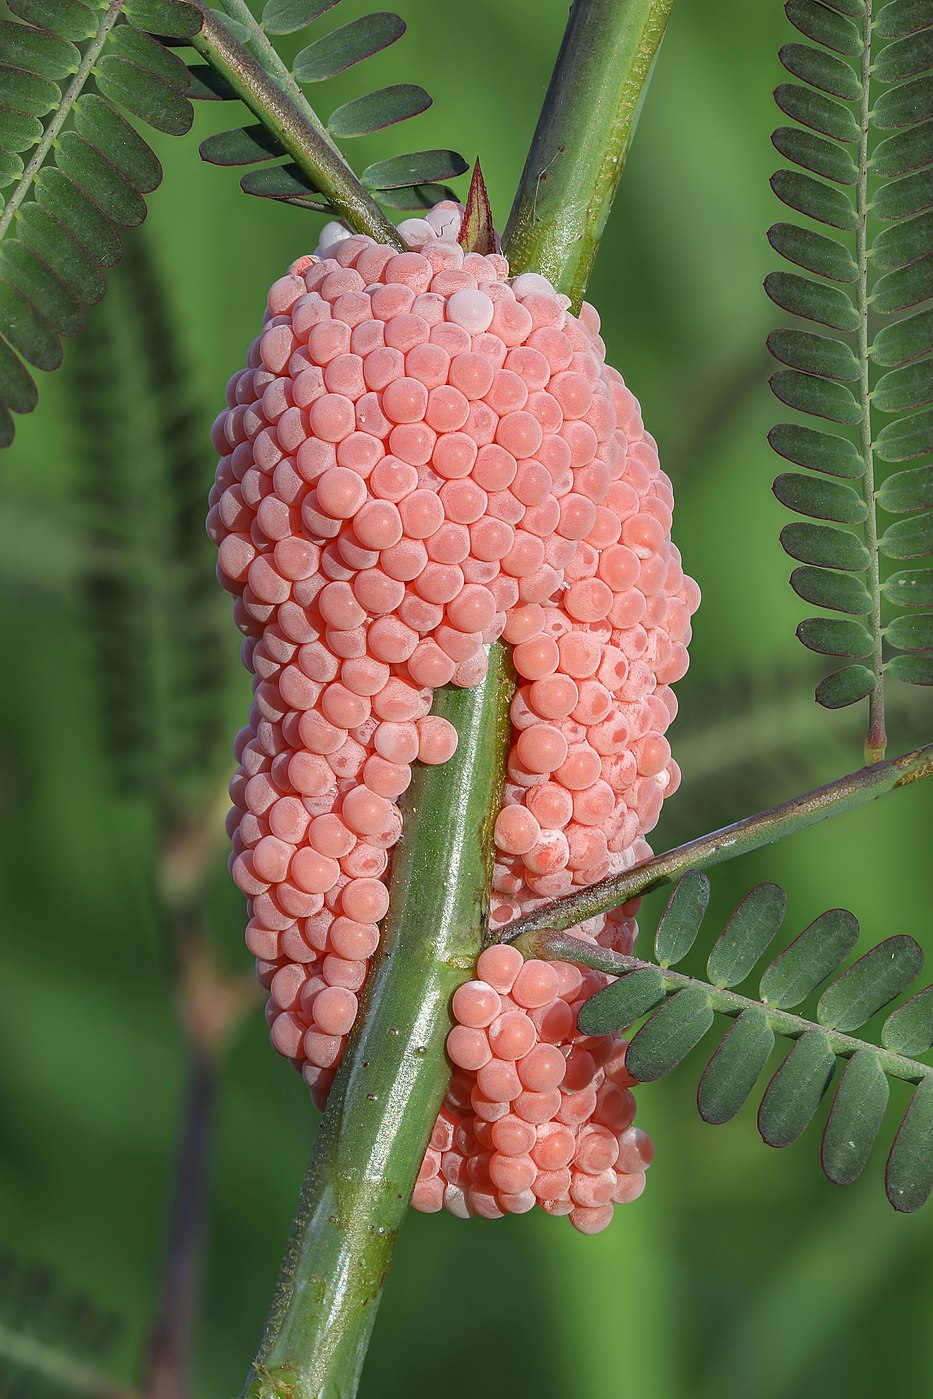 Golden apple snail pink eggs on a stem, in a rice field